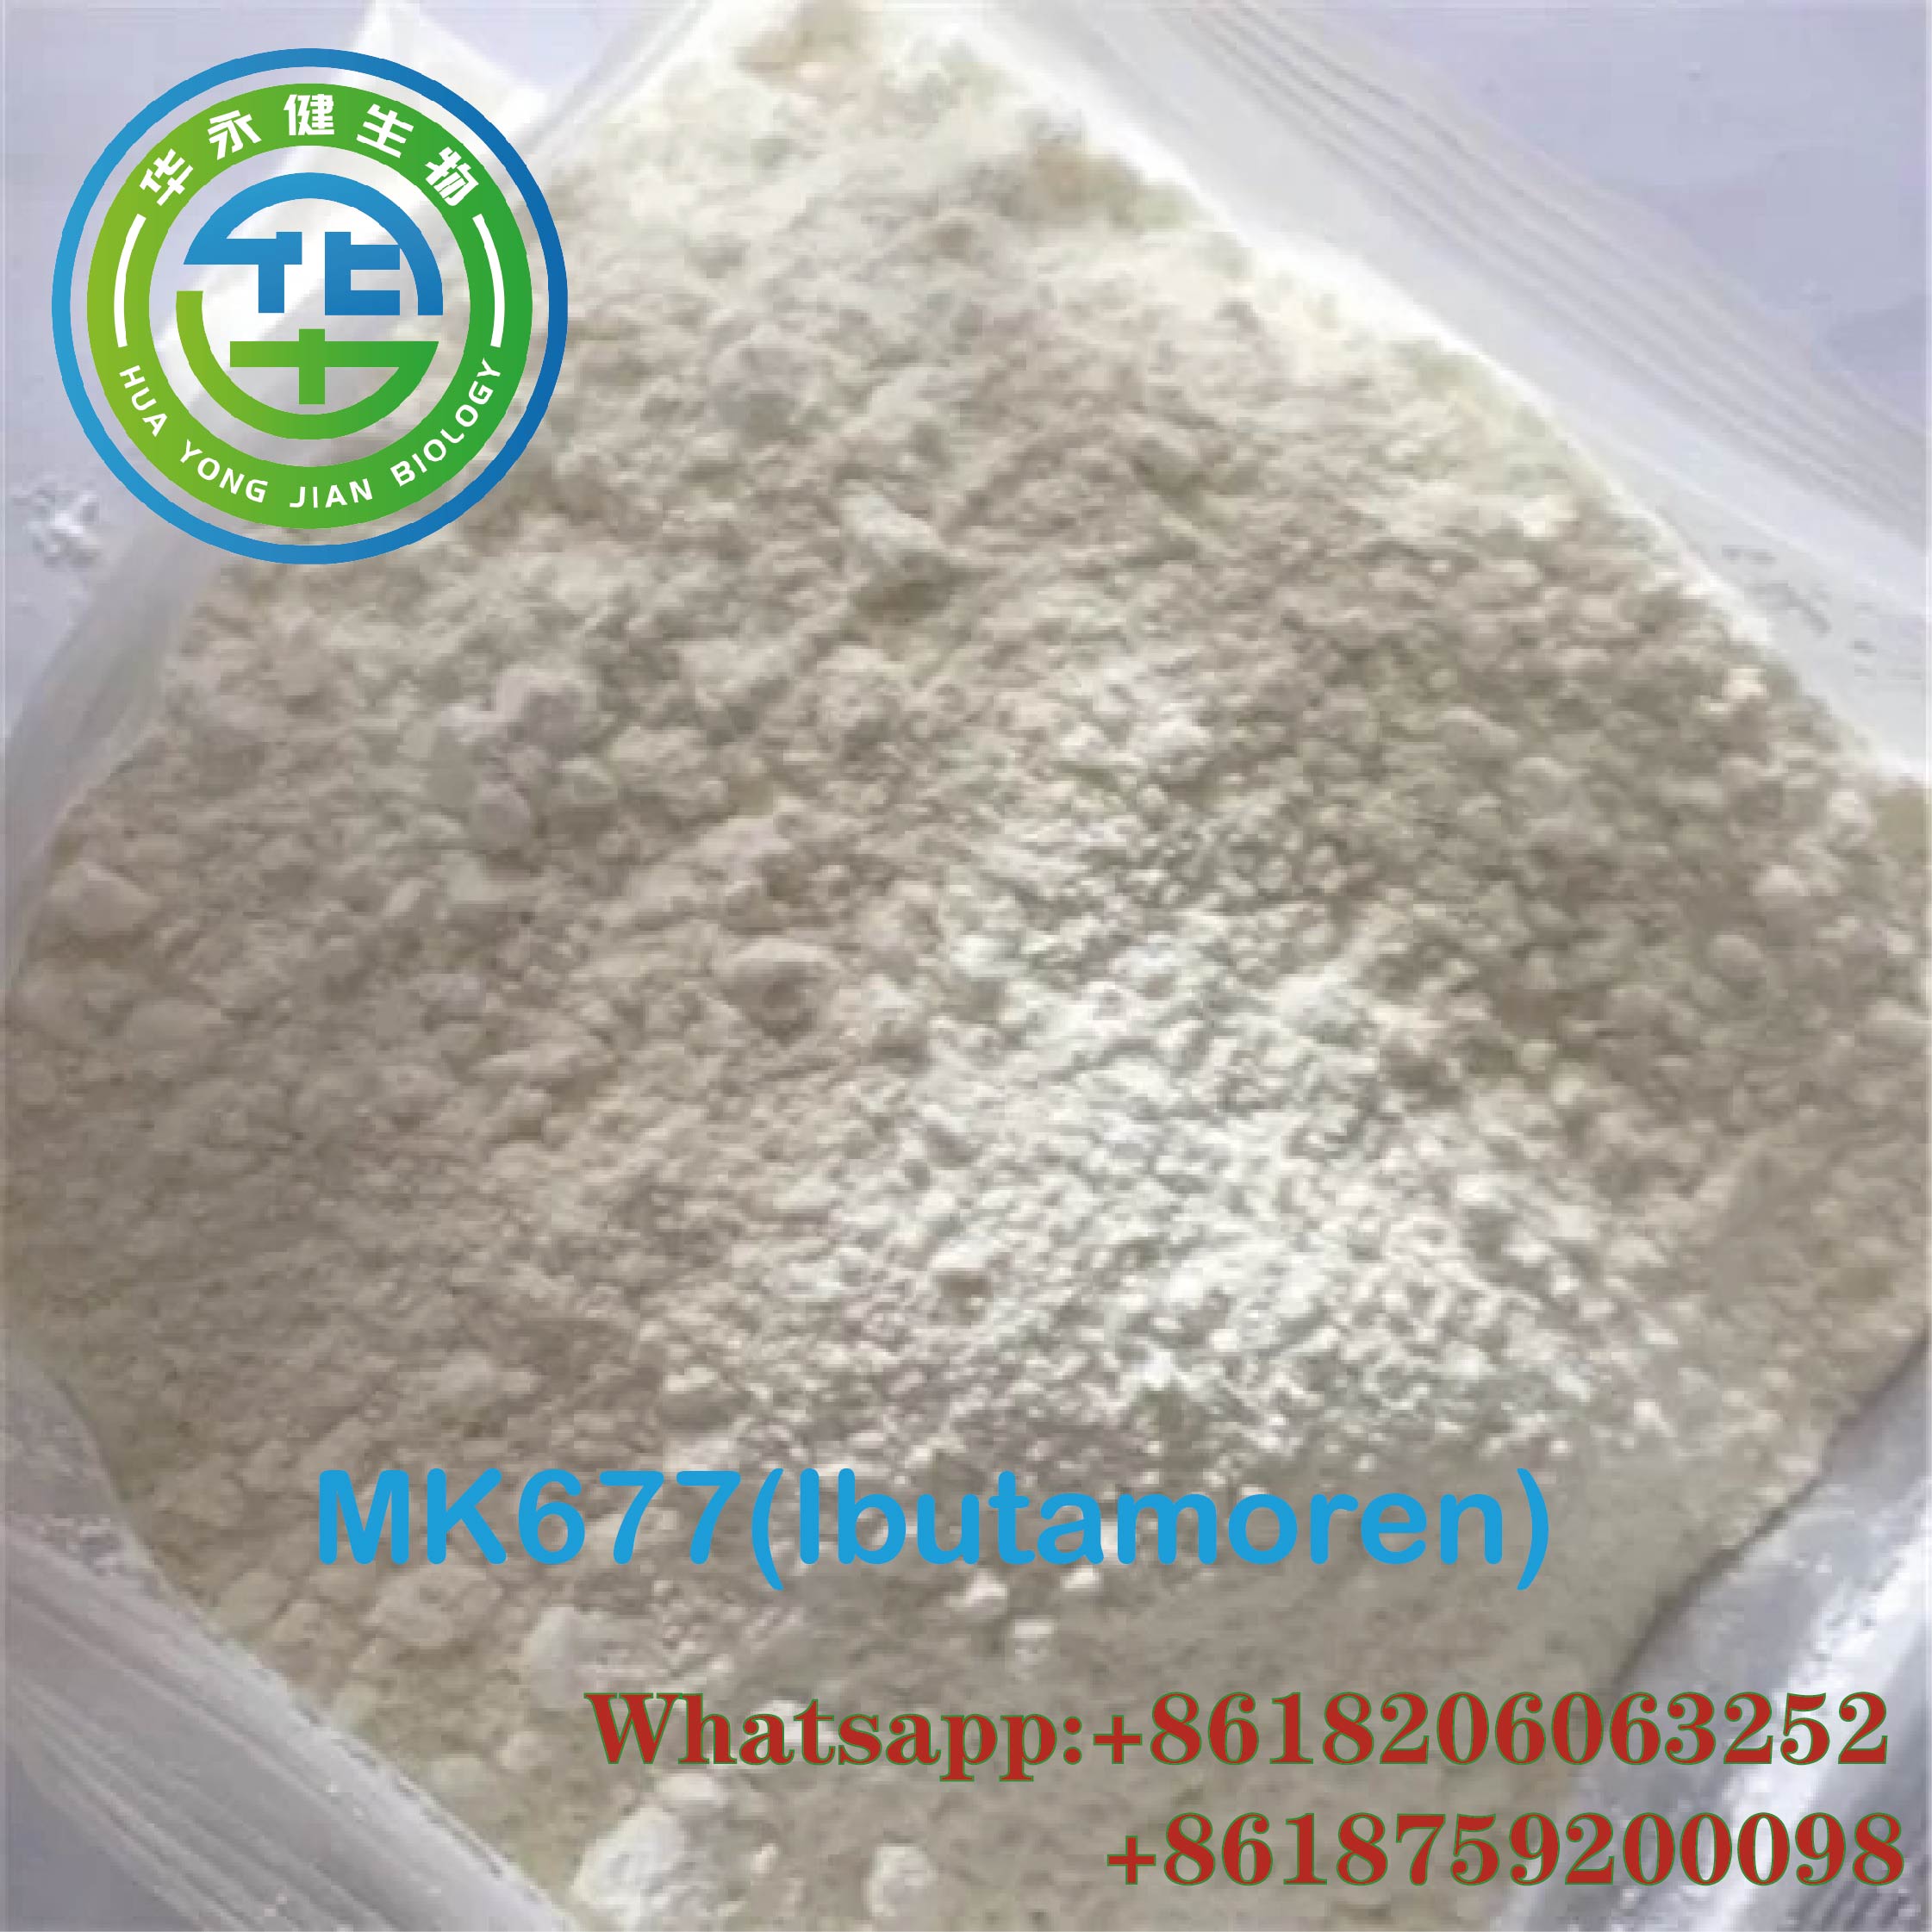 High Quality Gw0742 Powder Suppliers: Find the Best Deals Now